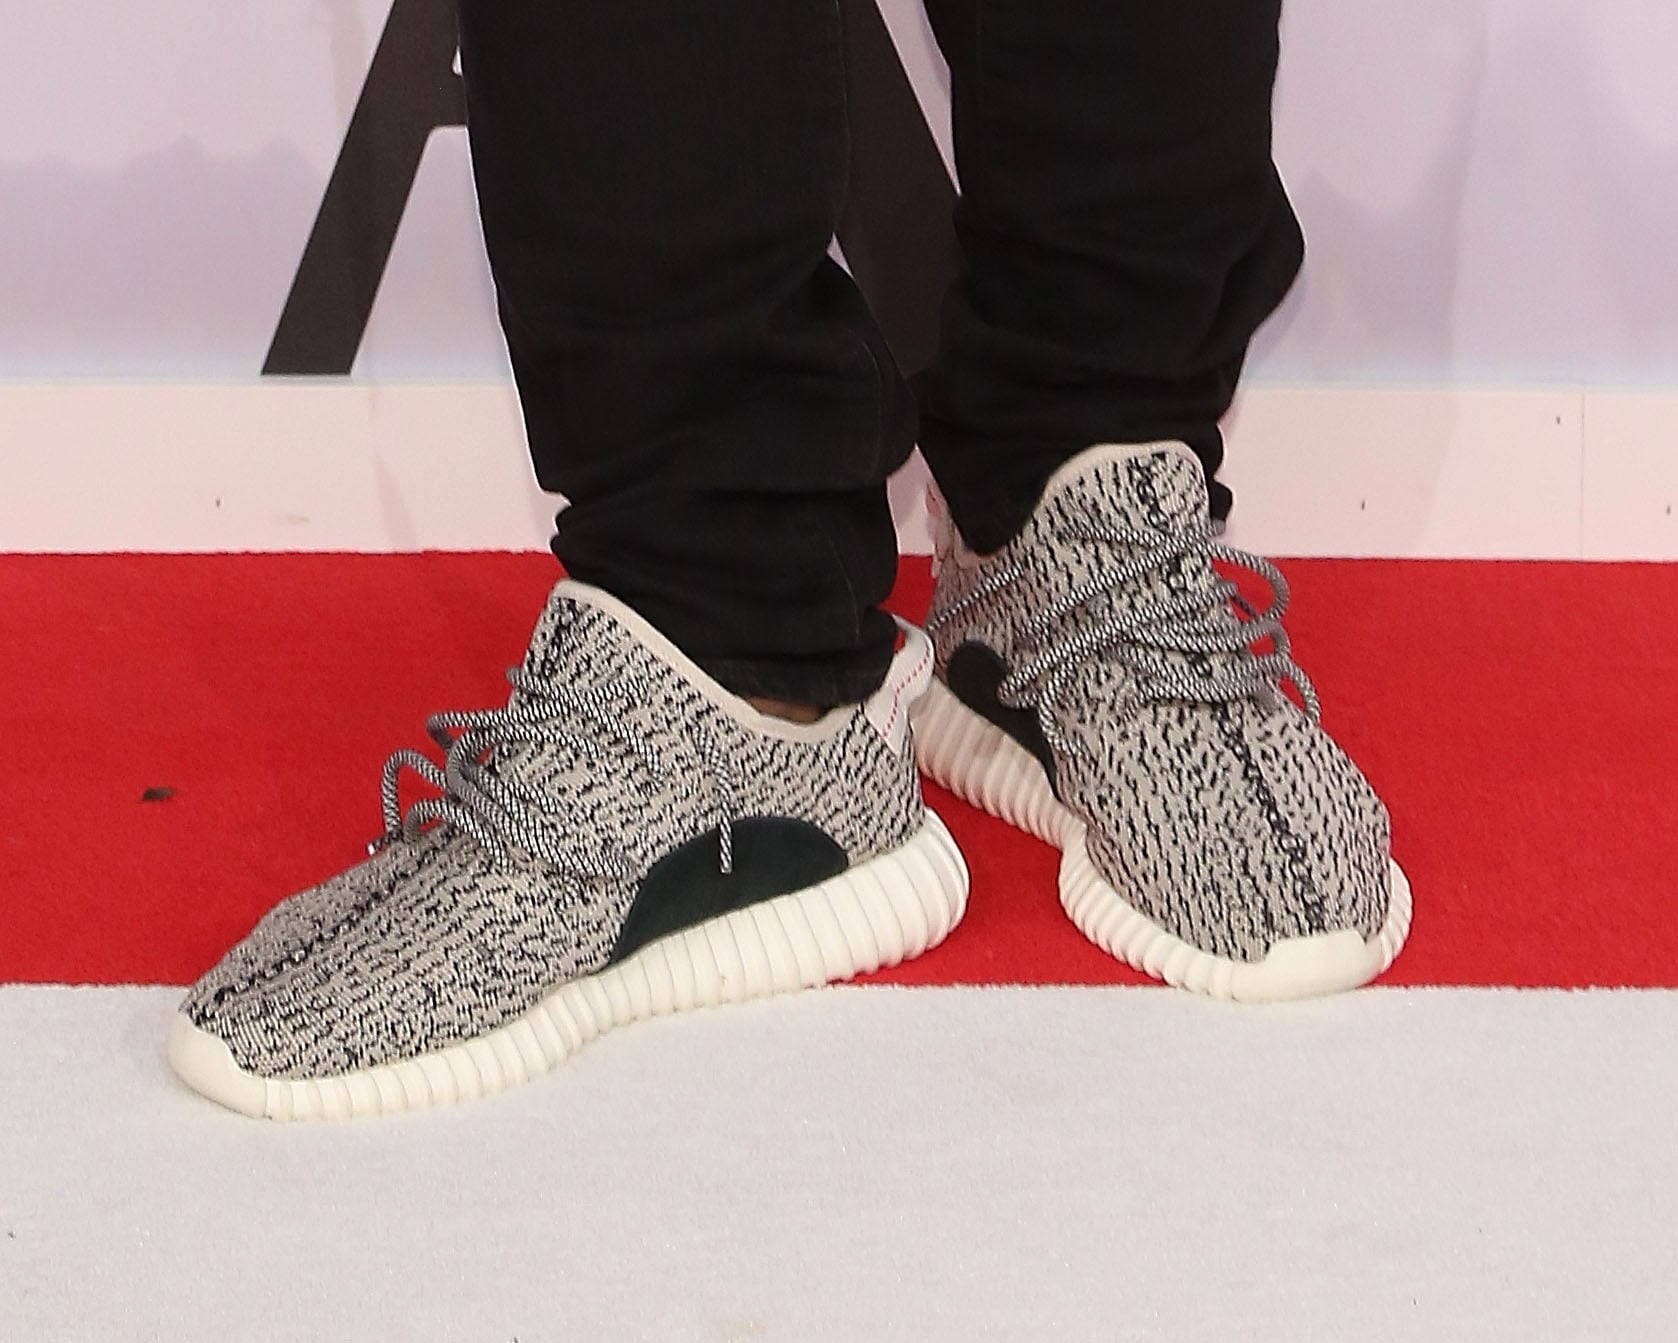 Kanye West adidas Yeezy show and Boost trainers